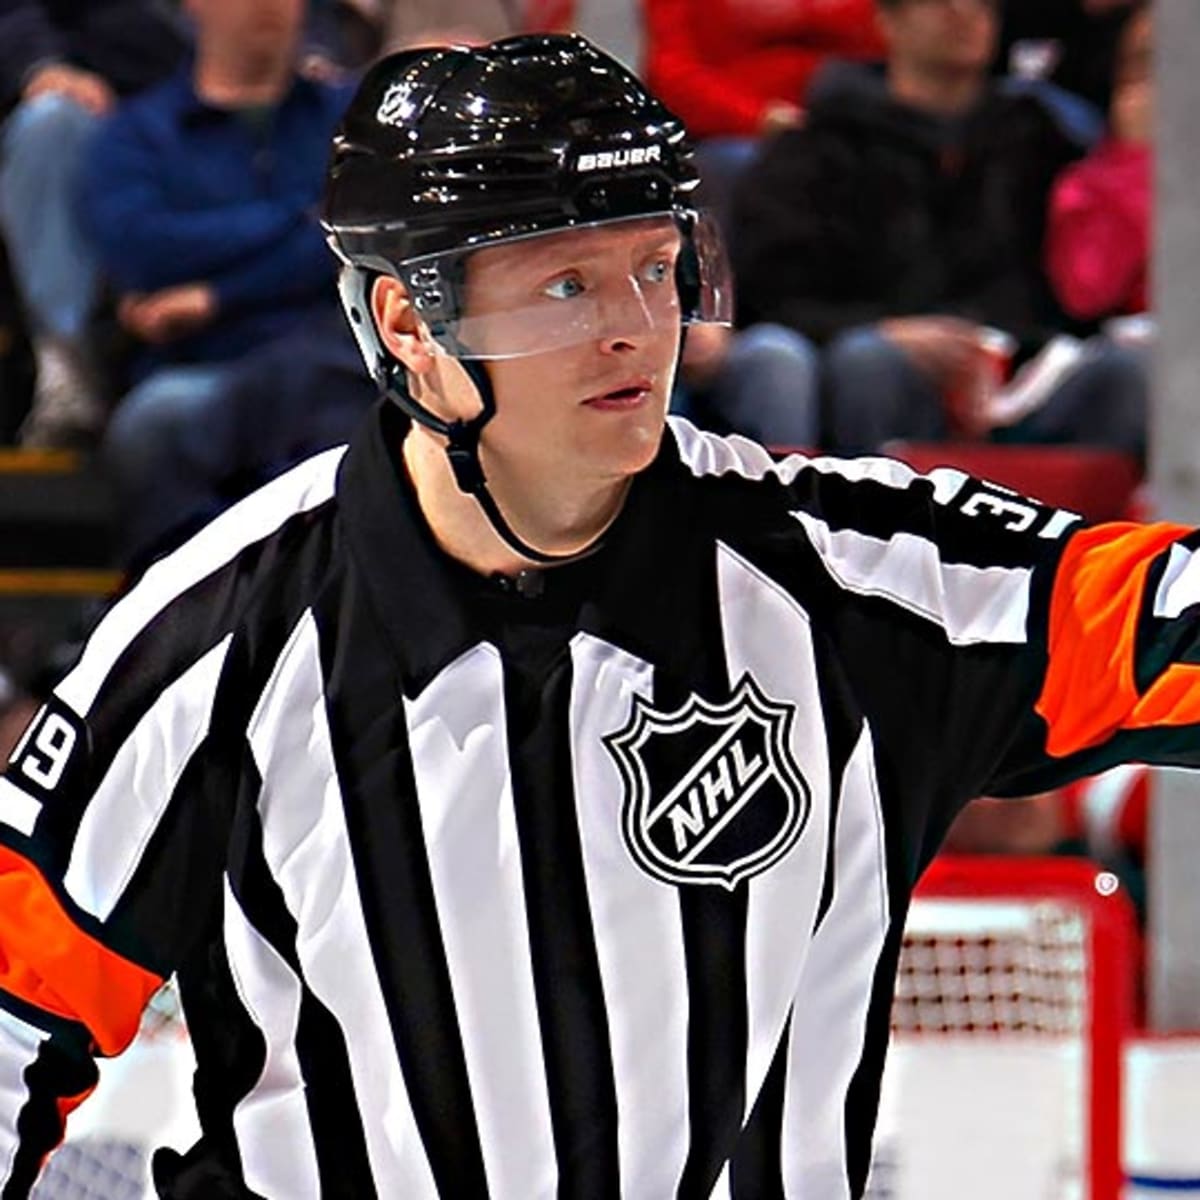 Behind the stripes: What 3 NHL officials enjoy off the ice - Guelph News